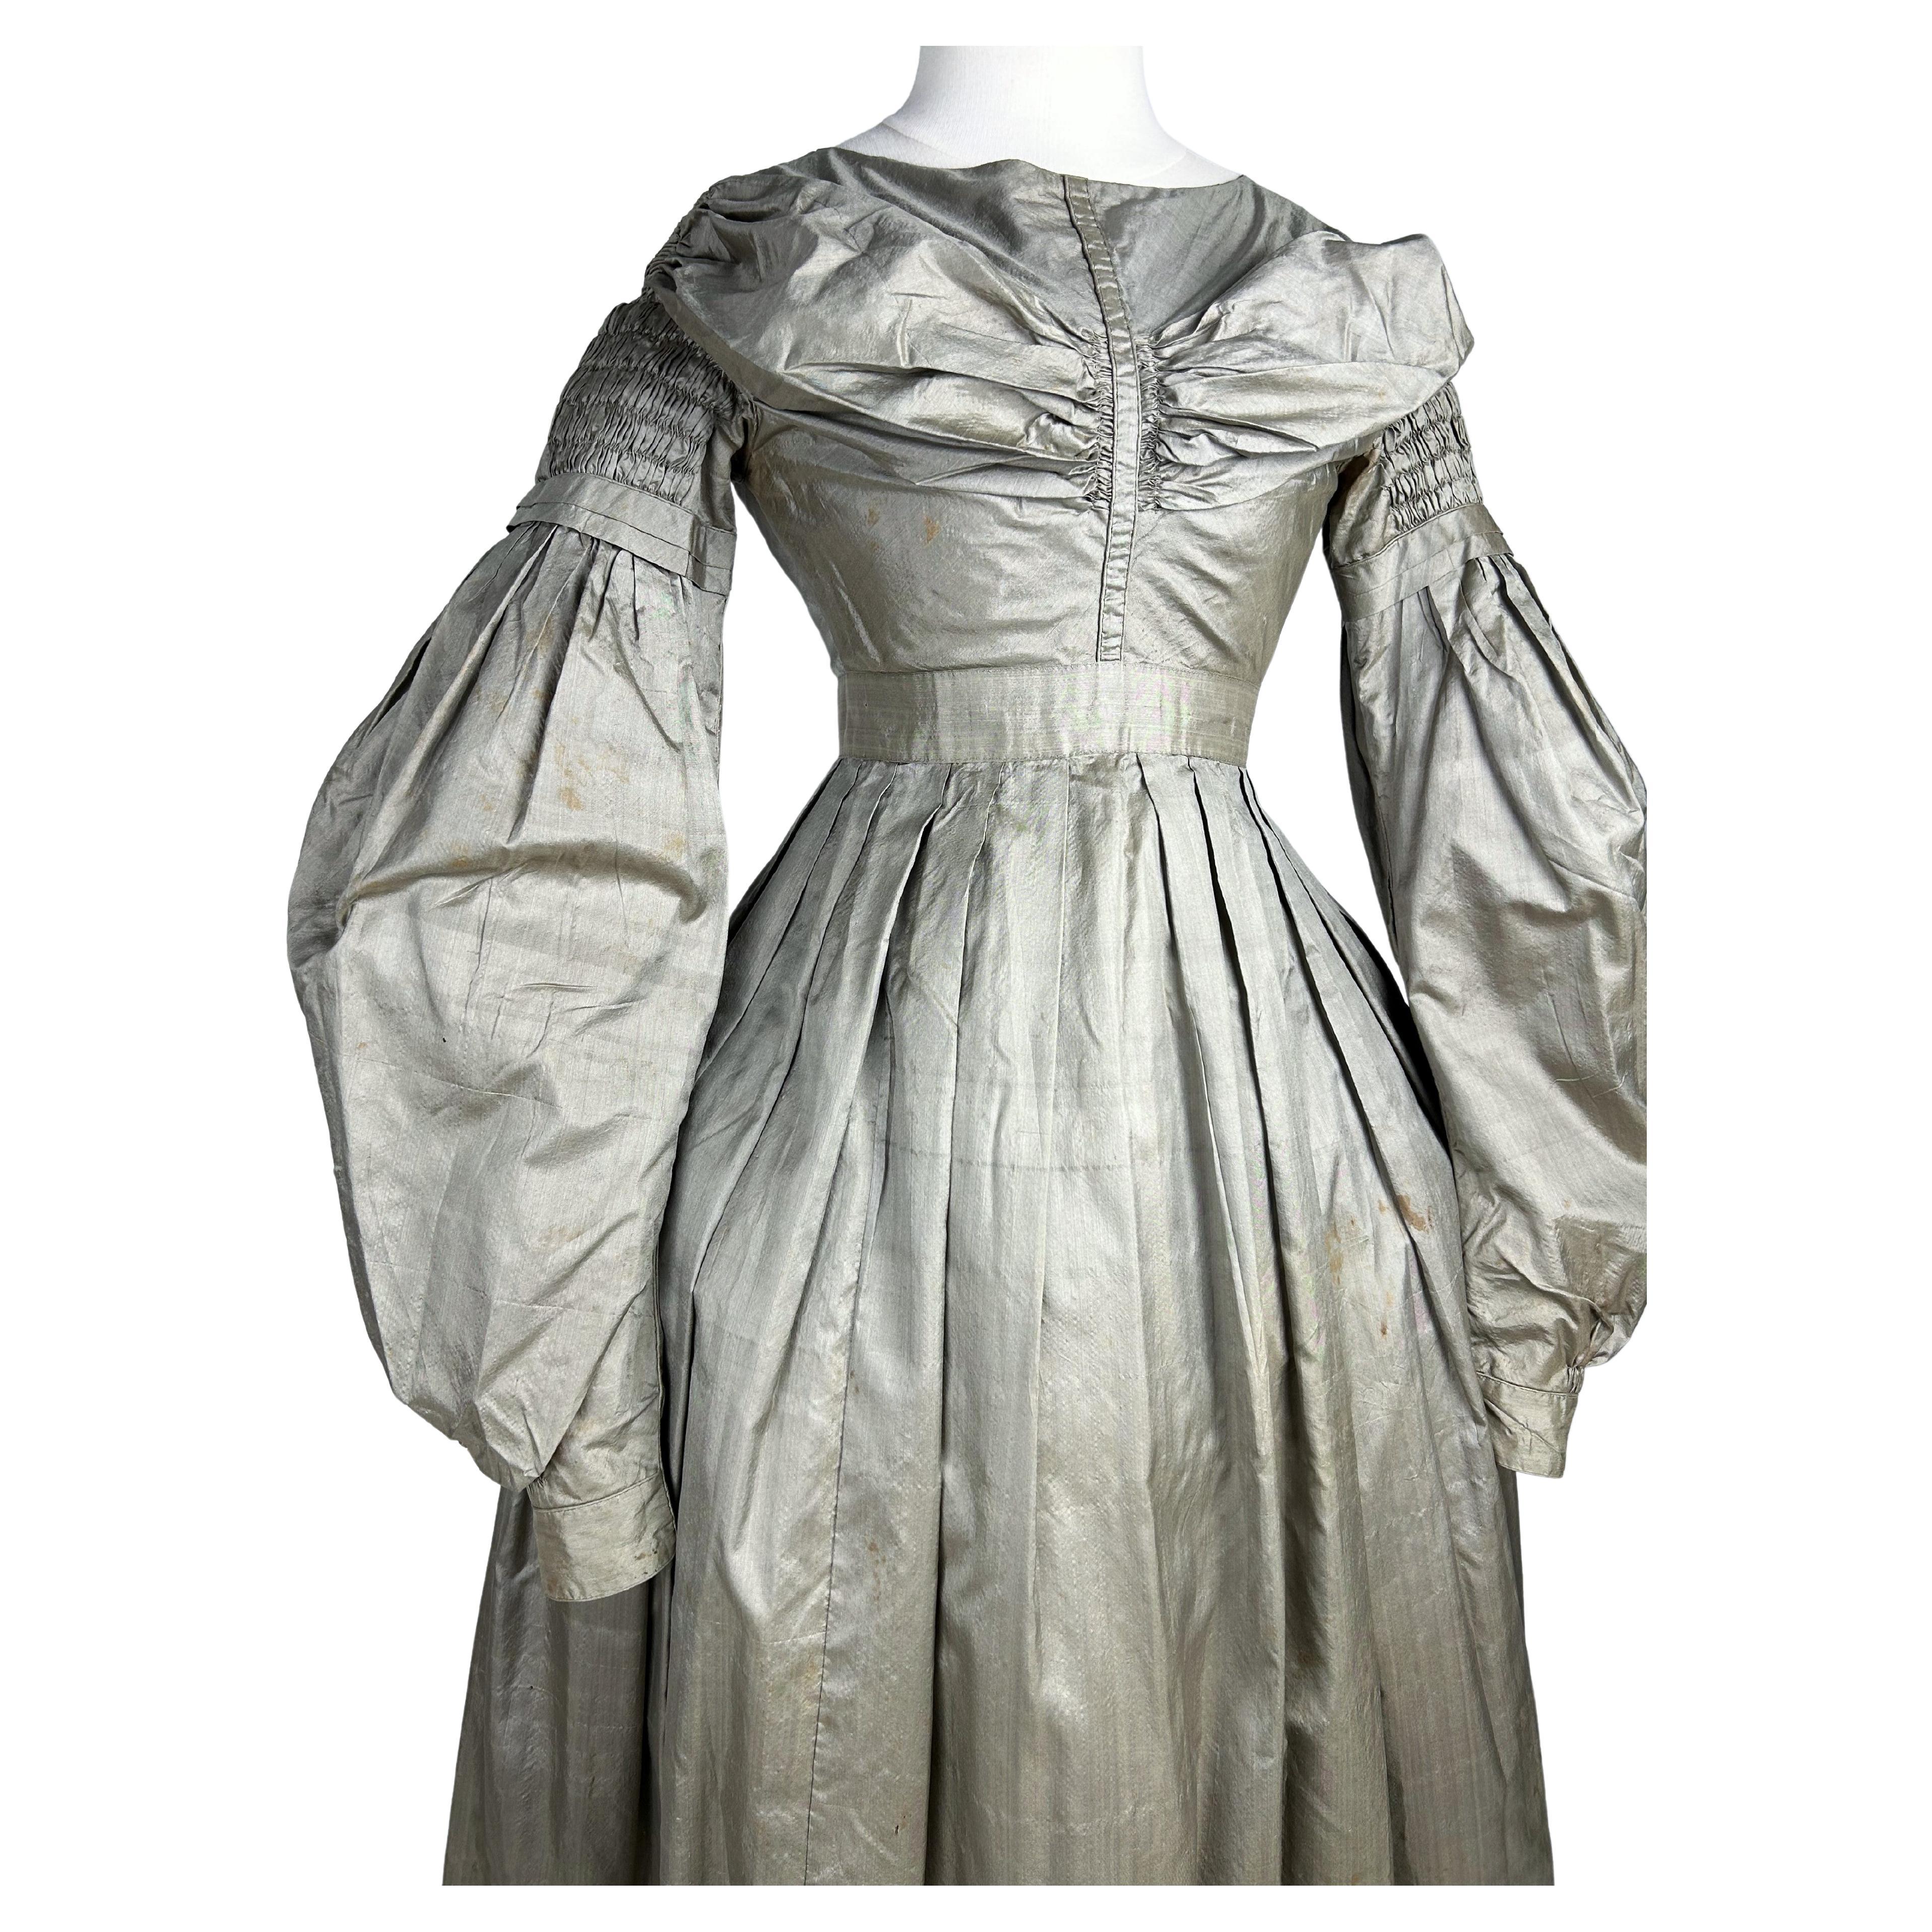 Circa 1840
France

Bronze or puce taffeta day dress dating from the end of the reign of Louis-Philippe. Brown chintz-lined dress with high-waisted bodice, draped pleats highlighting the bosom and closed by hooks in the back with a V-cut. Small oval